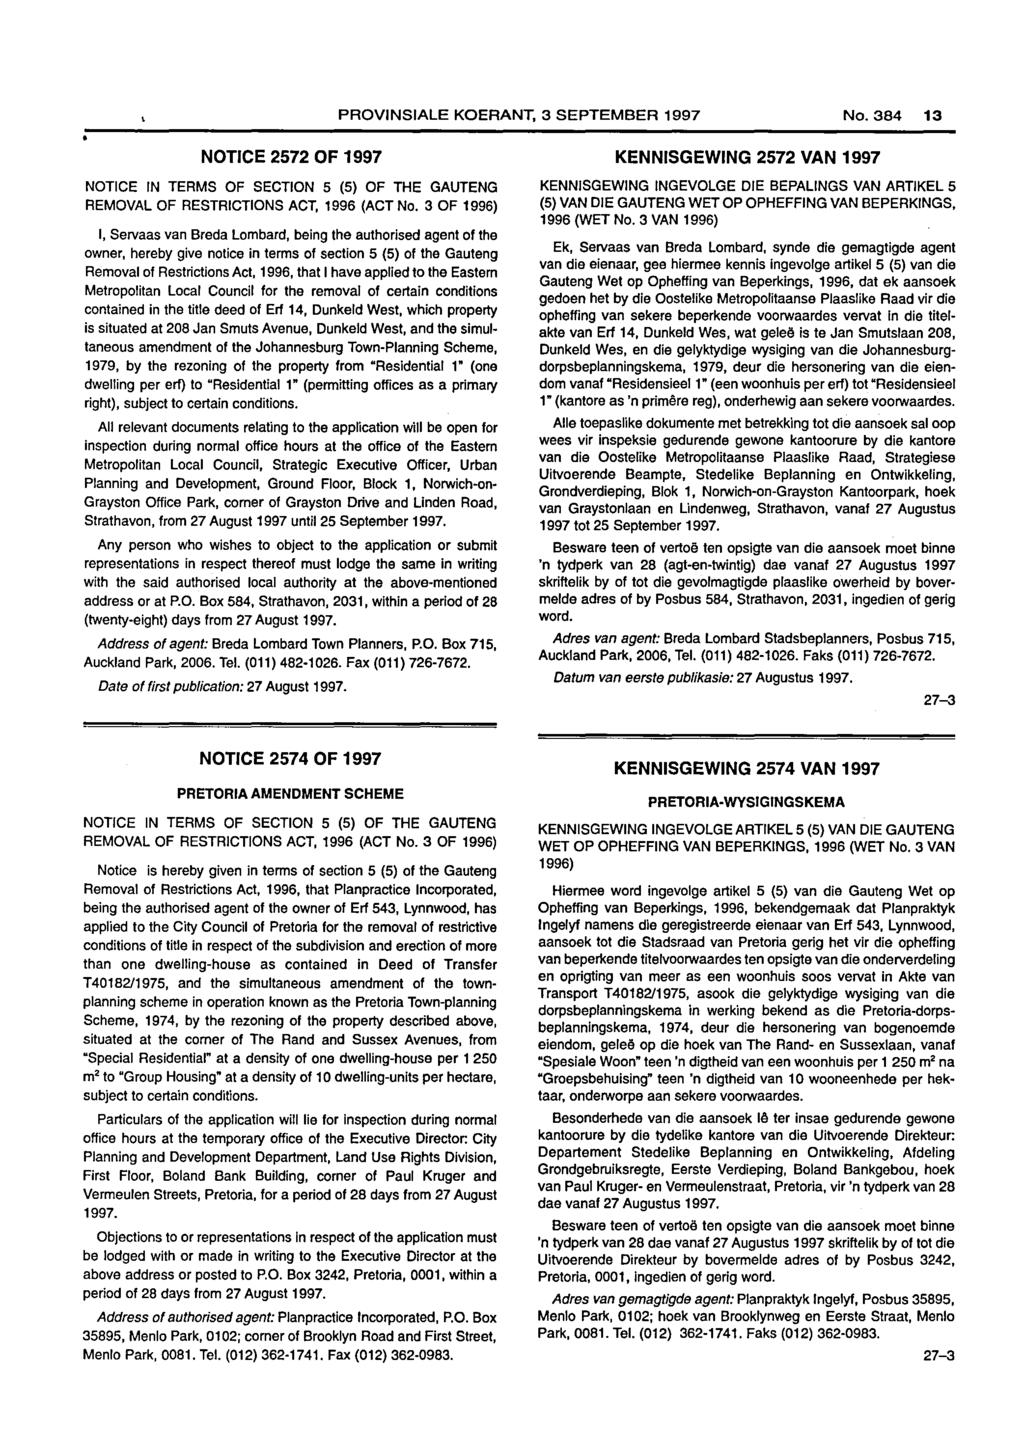 PROVINSIALE KOERANT, 3 SEPTEMBER 1997 No. 13 NOTICE 2572 OF 1997 NOTICE IN TERMS OF SECTION 5 (5) OF THE GAUTENG REMOVAL OF RESTRICTIONS ACT, 1996 (ACT No.